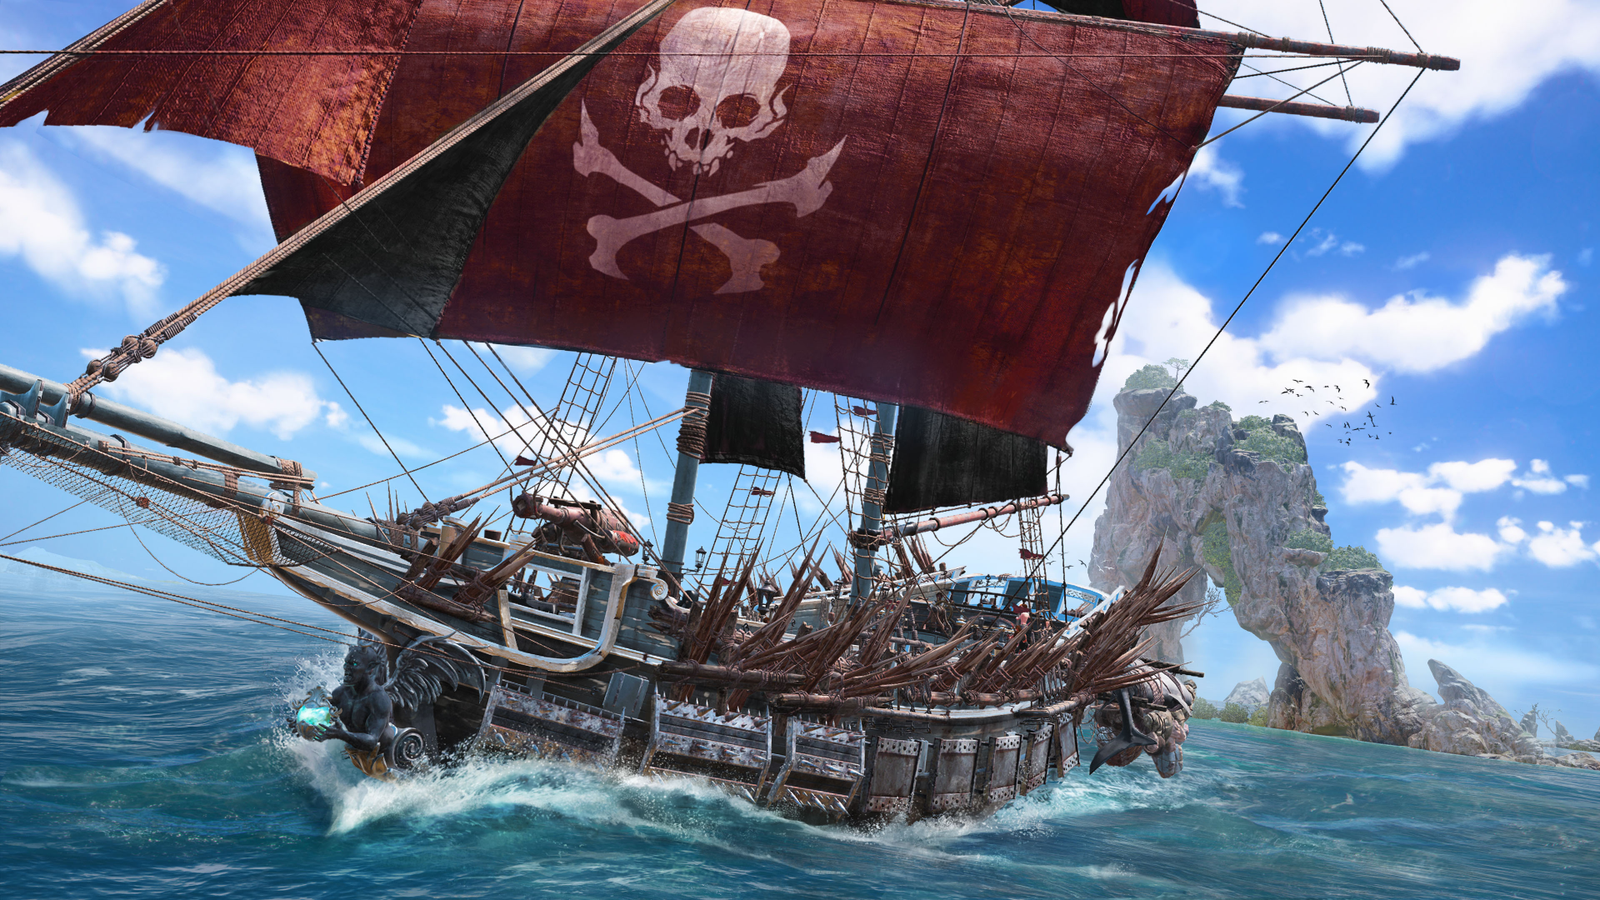 In Skull & Bones you're essentially a boat – you can't leave the helm